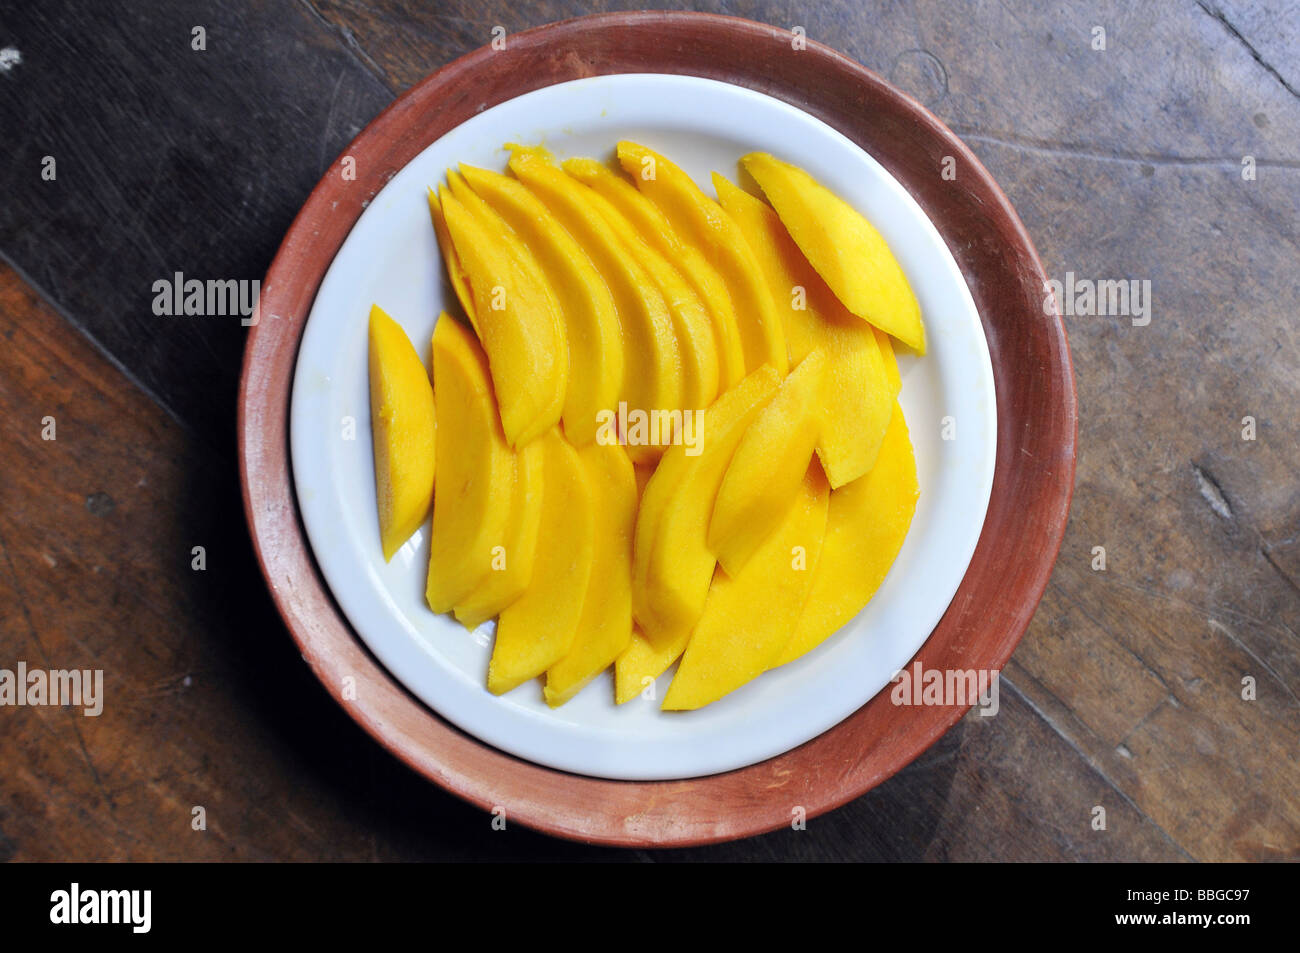 Mango cut into slices on a plate Stock Photo